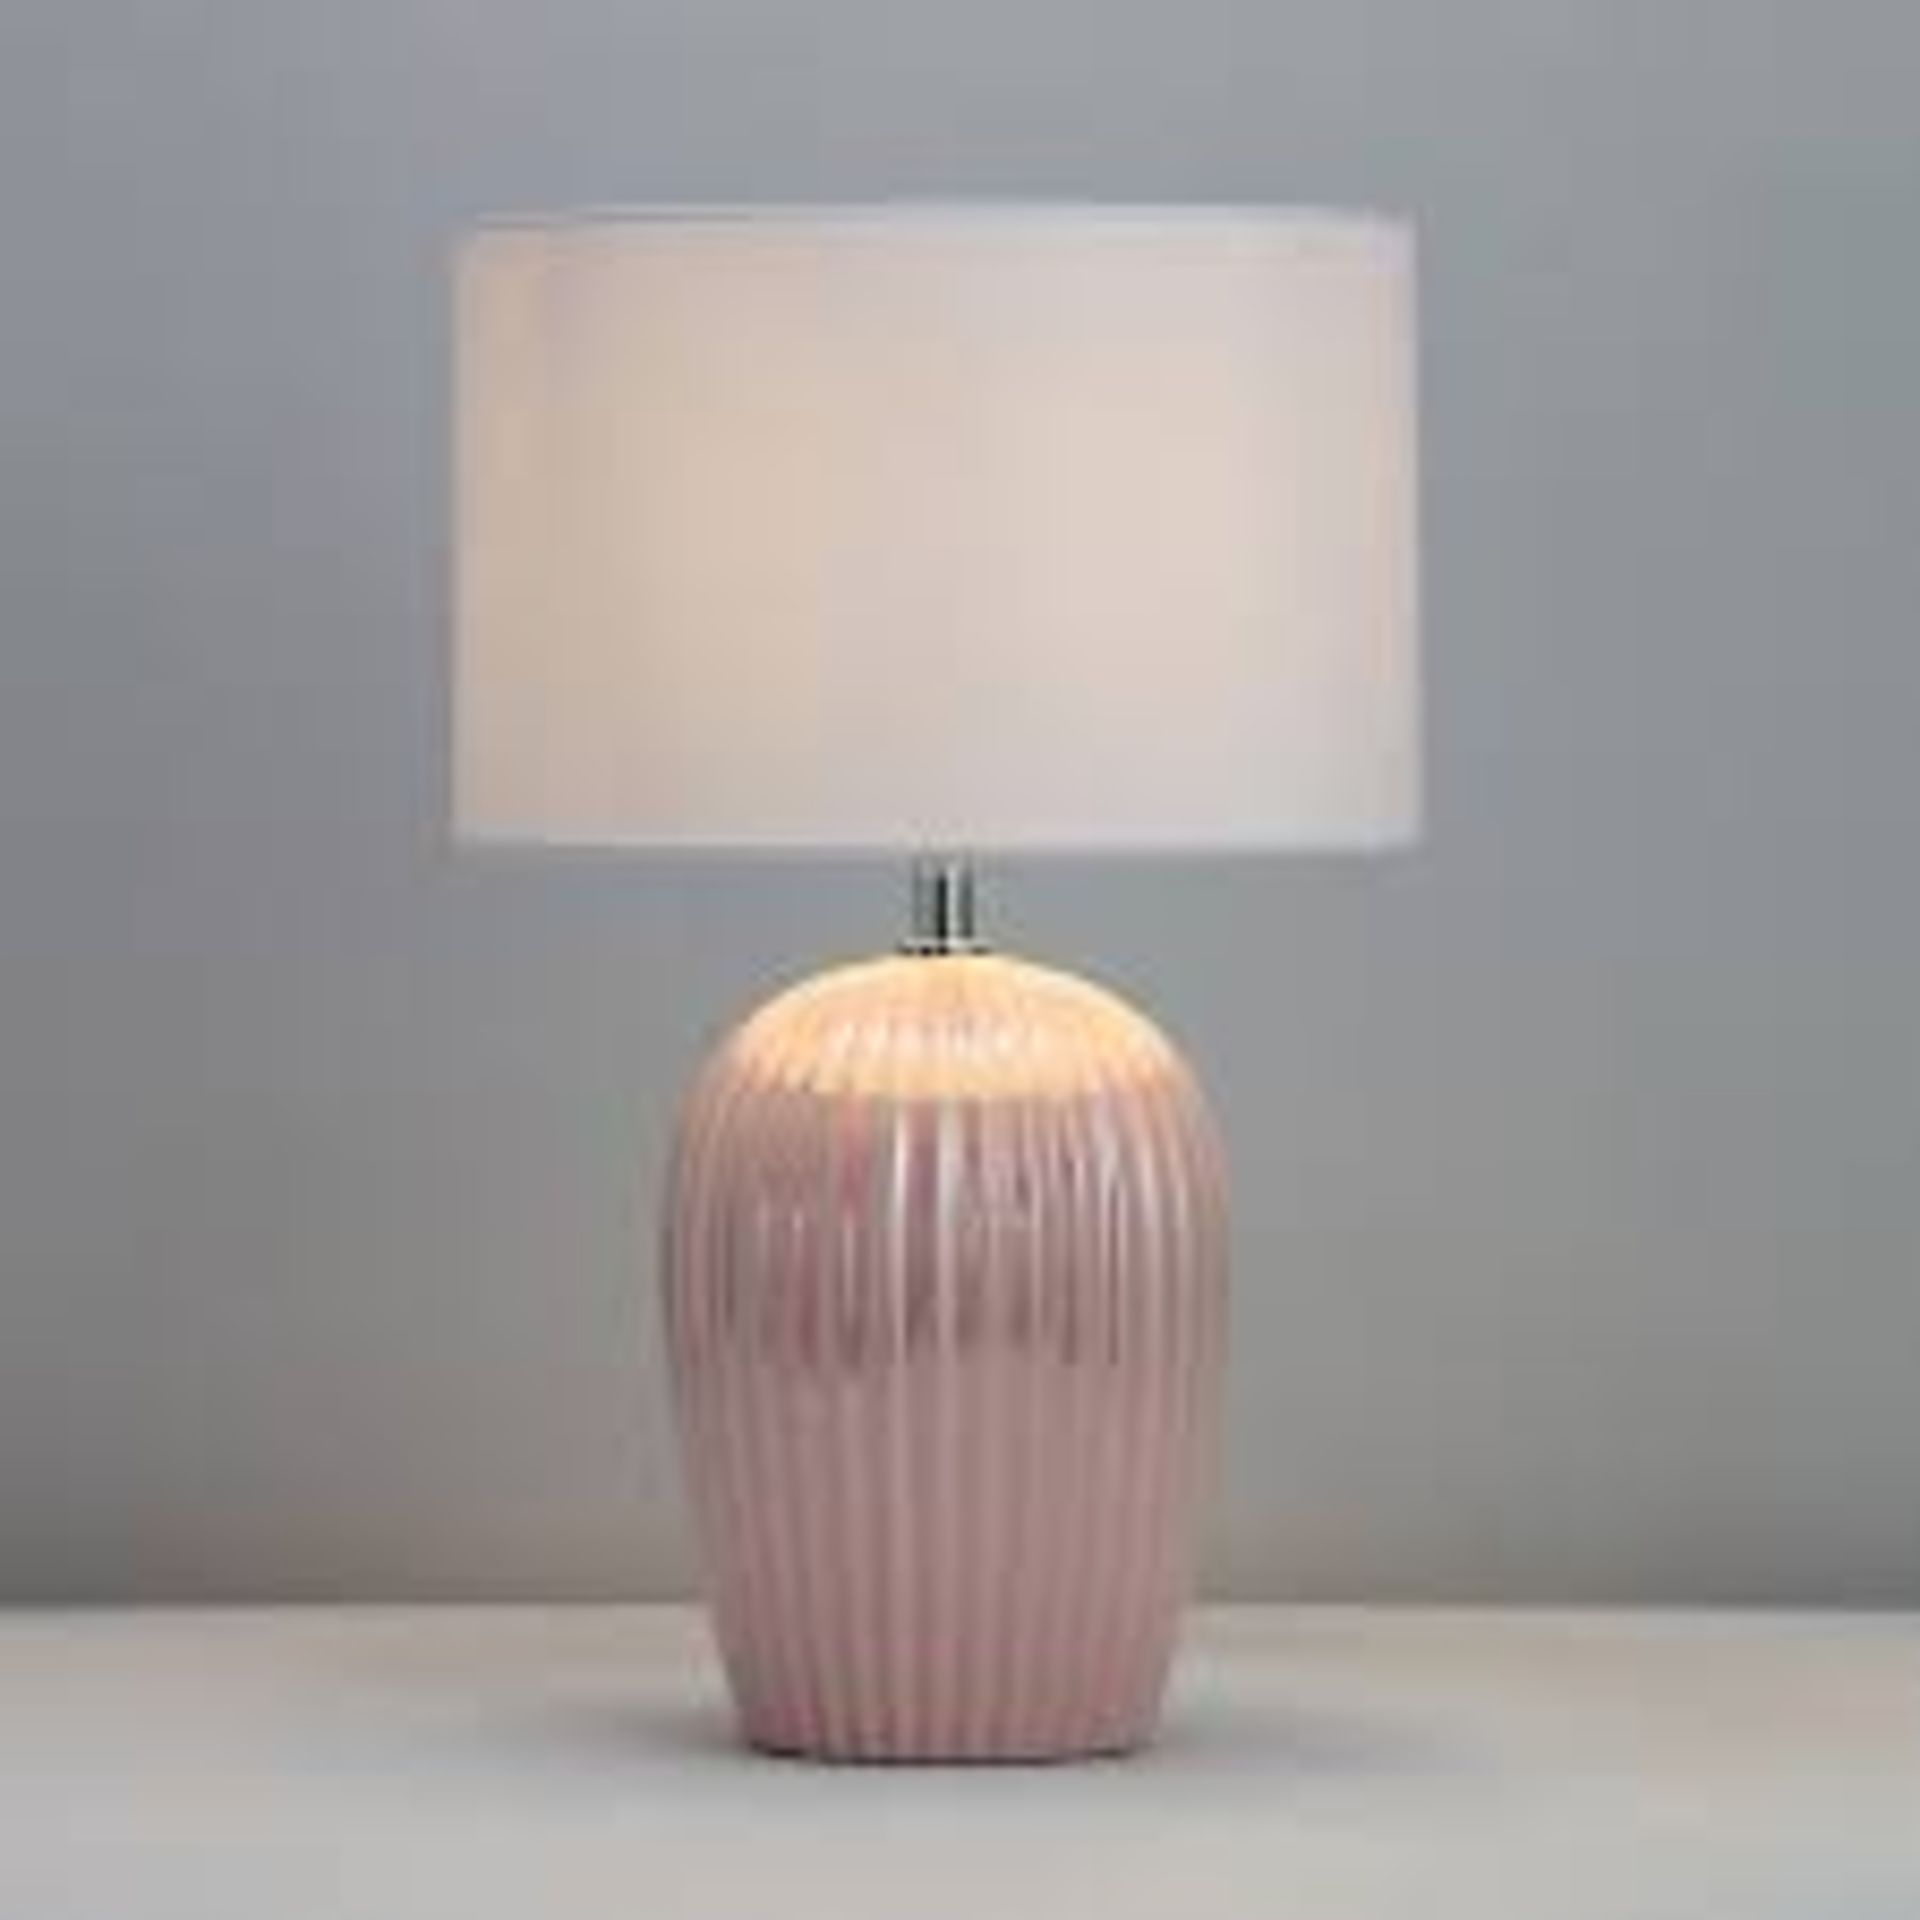 Inlight Hermippe Ceramic Pink Table light. - SR48. The traditional, pink glazed, ceramic Hermippe